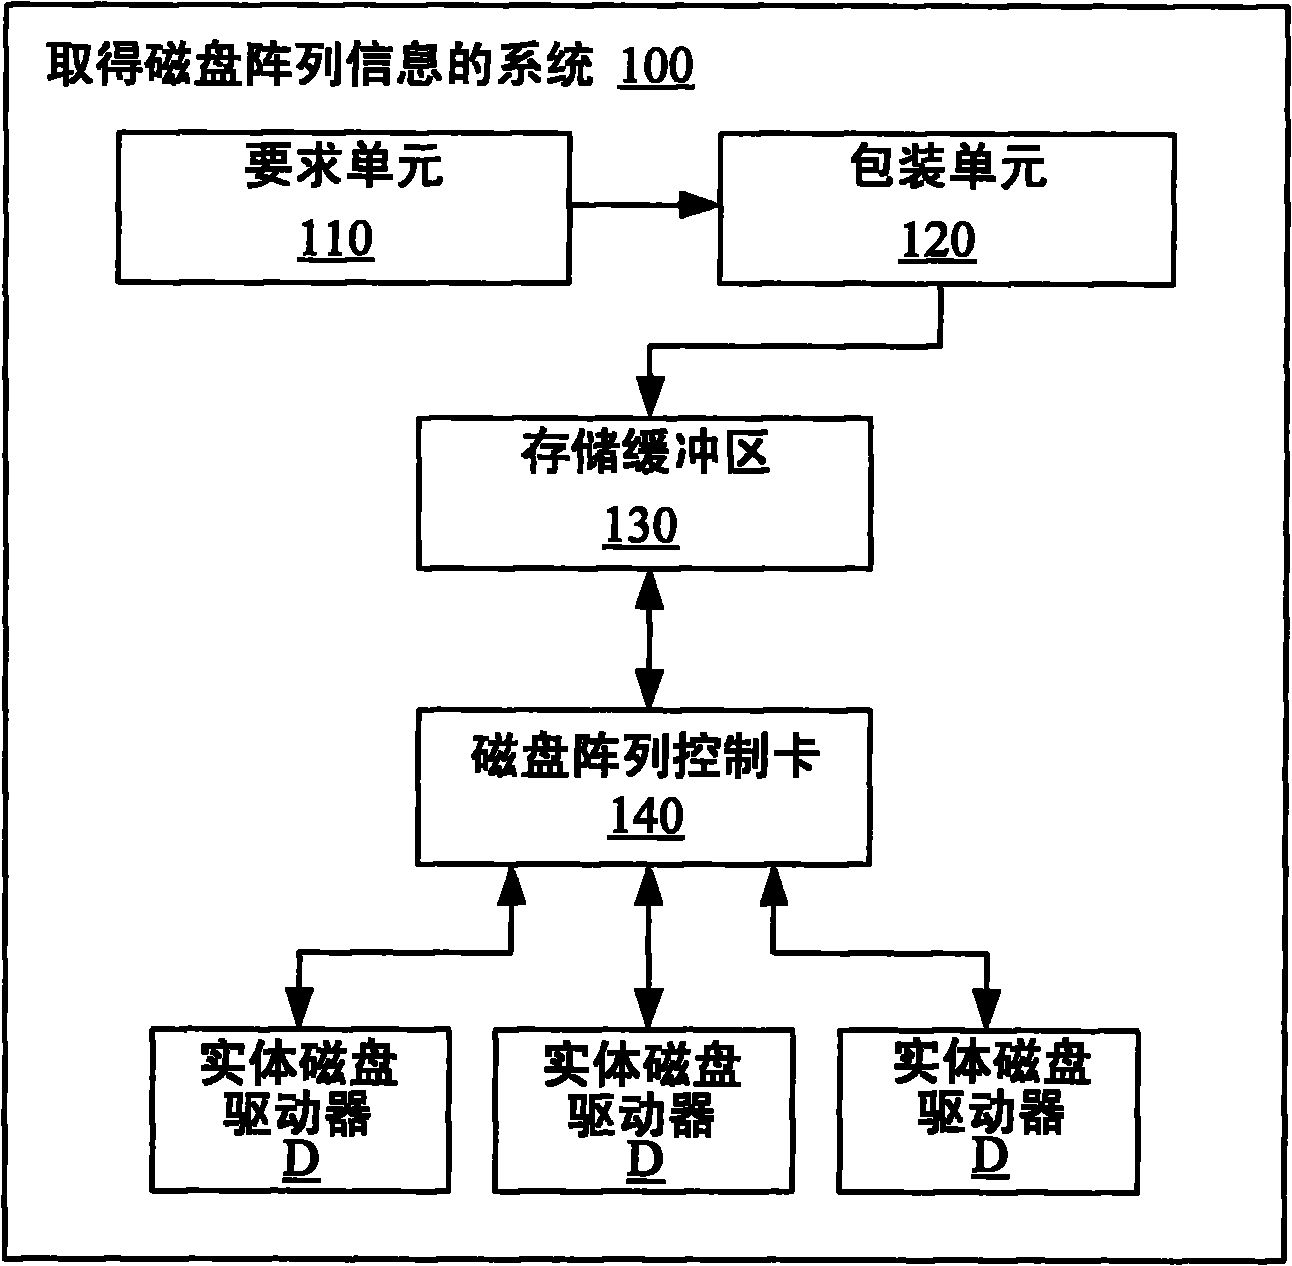 Method and system for acquiring disk array information